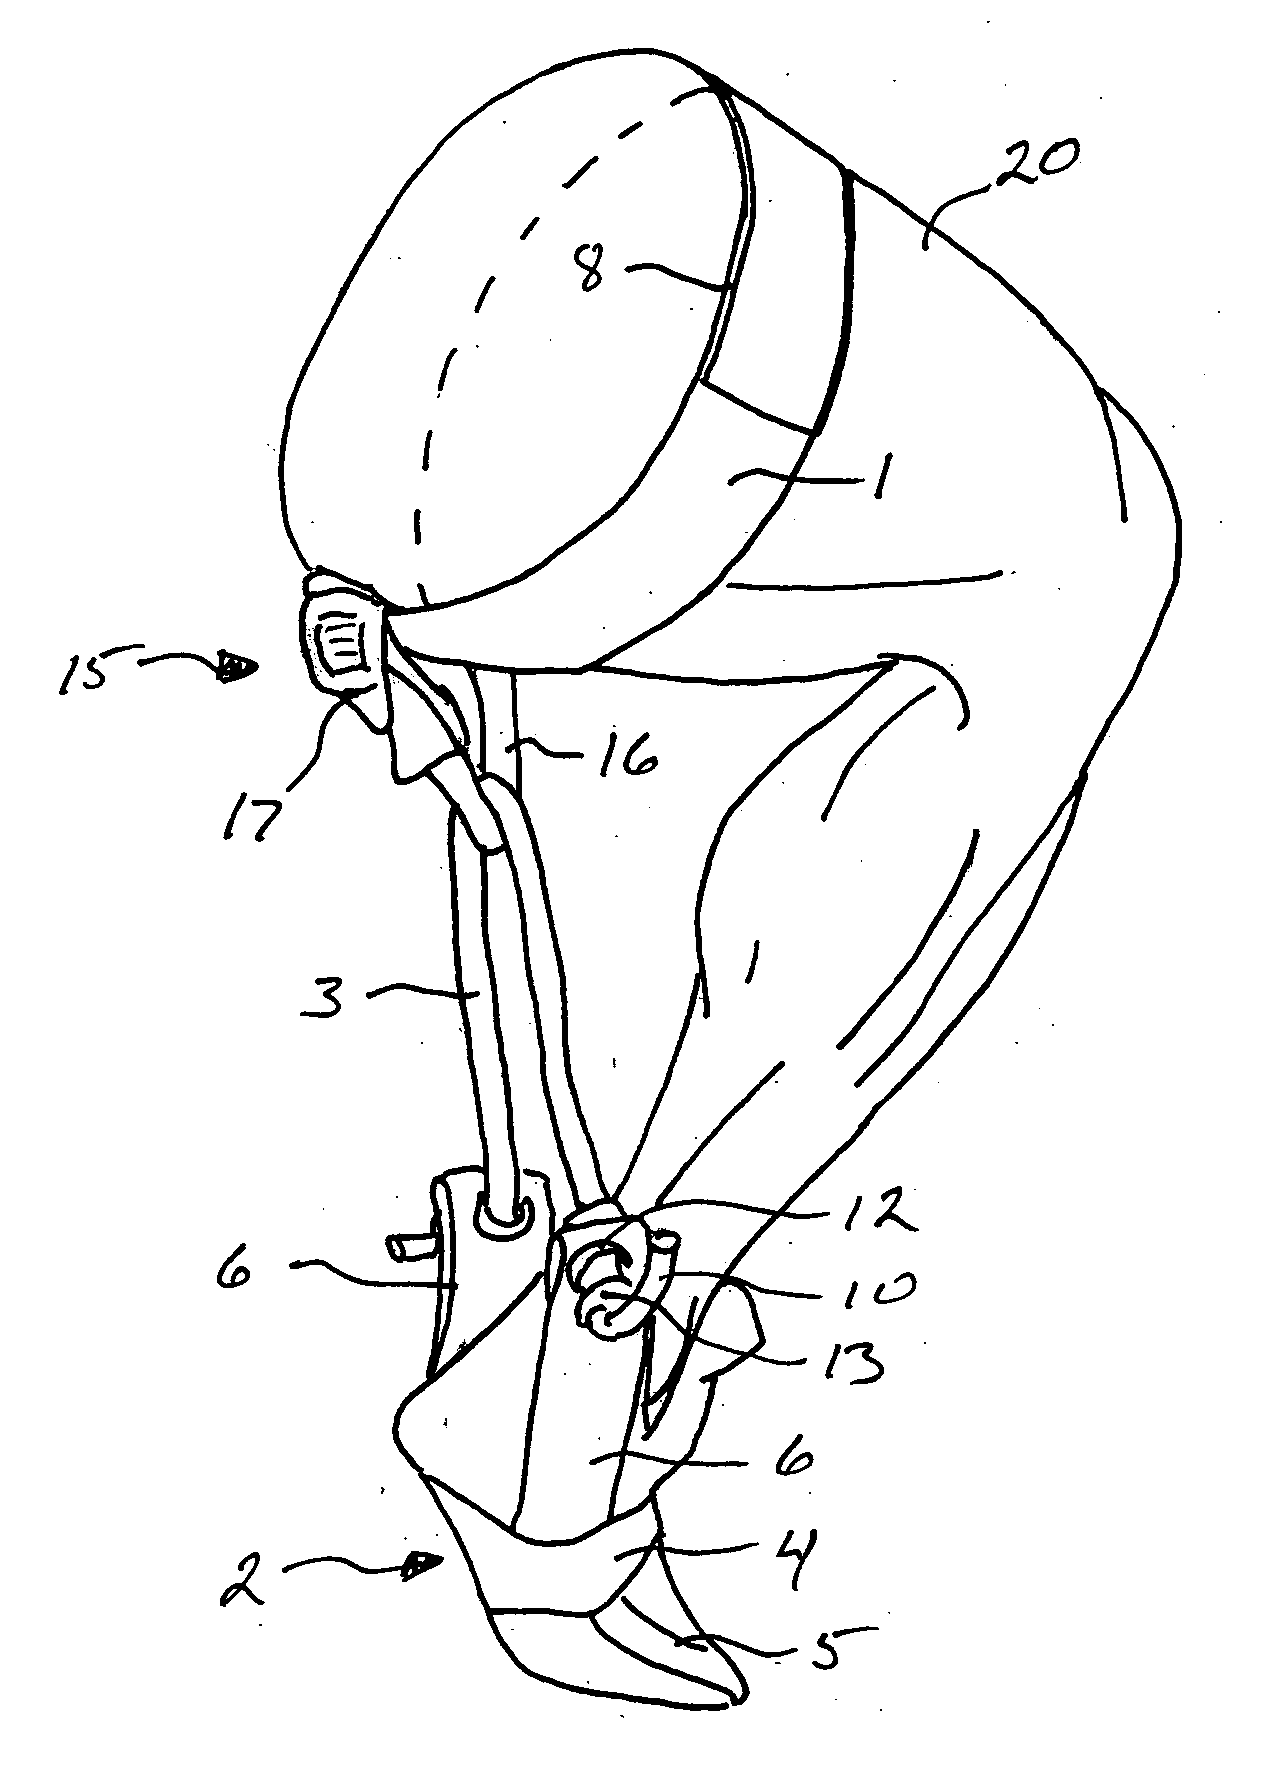 Runner training and exercise device